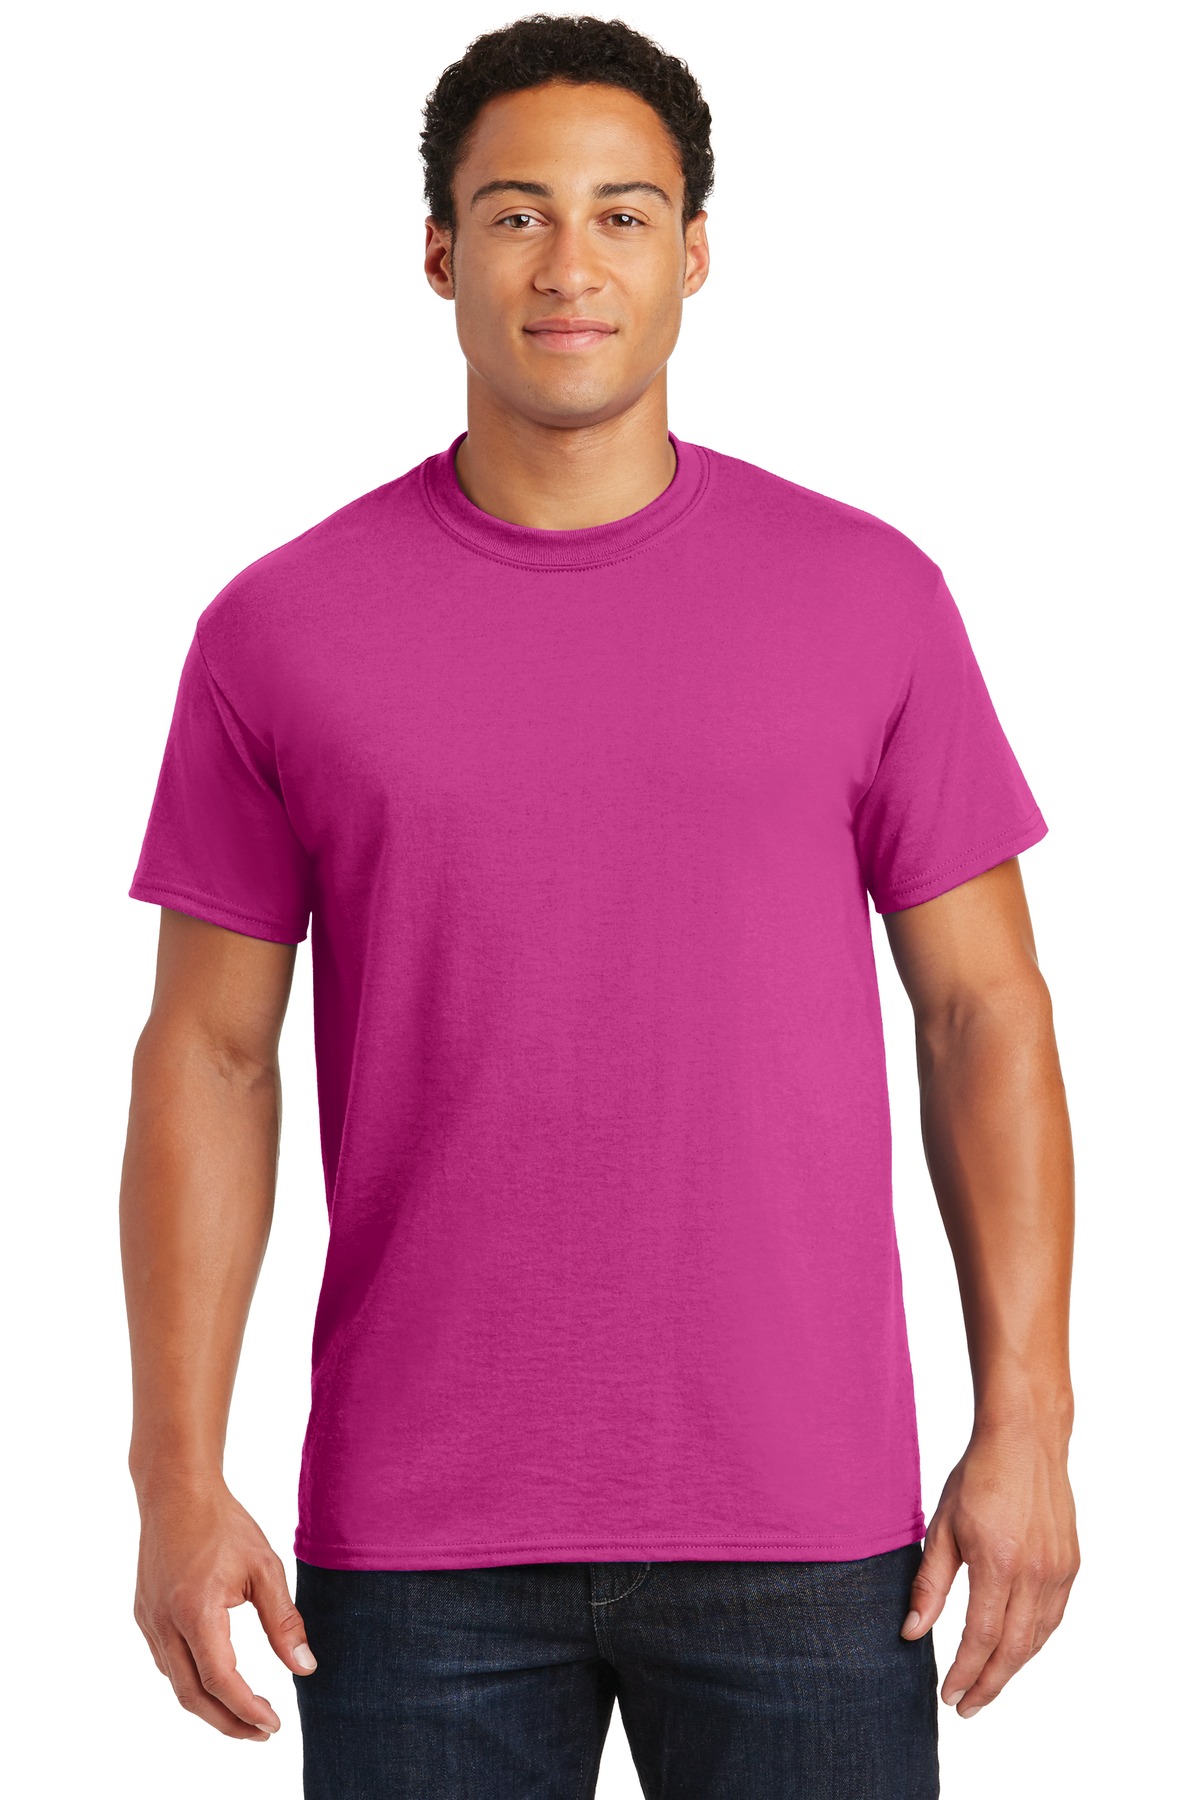 Safety Pink Short Sleeve T-Shirt - 50/50 Cotton/Poly (Preshrunk) *Custom  Printing Available*